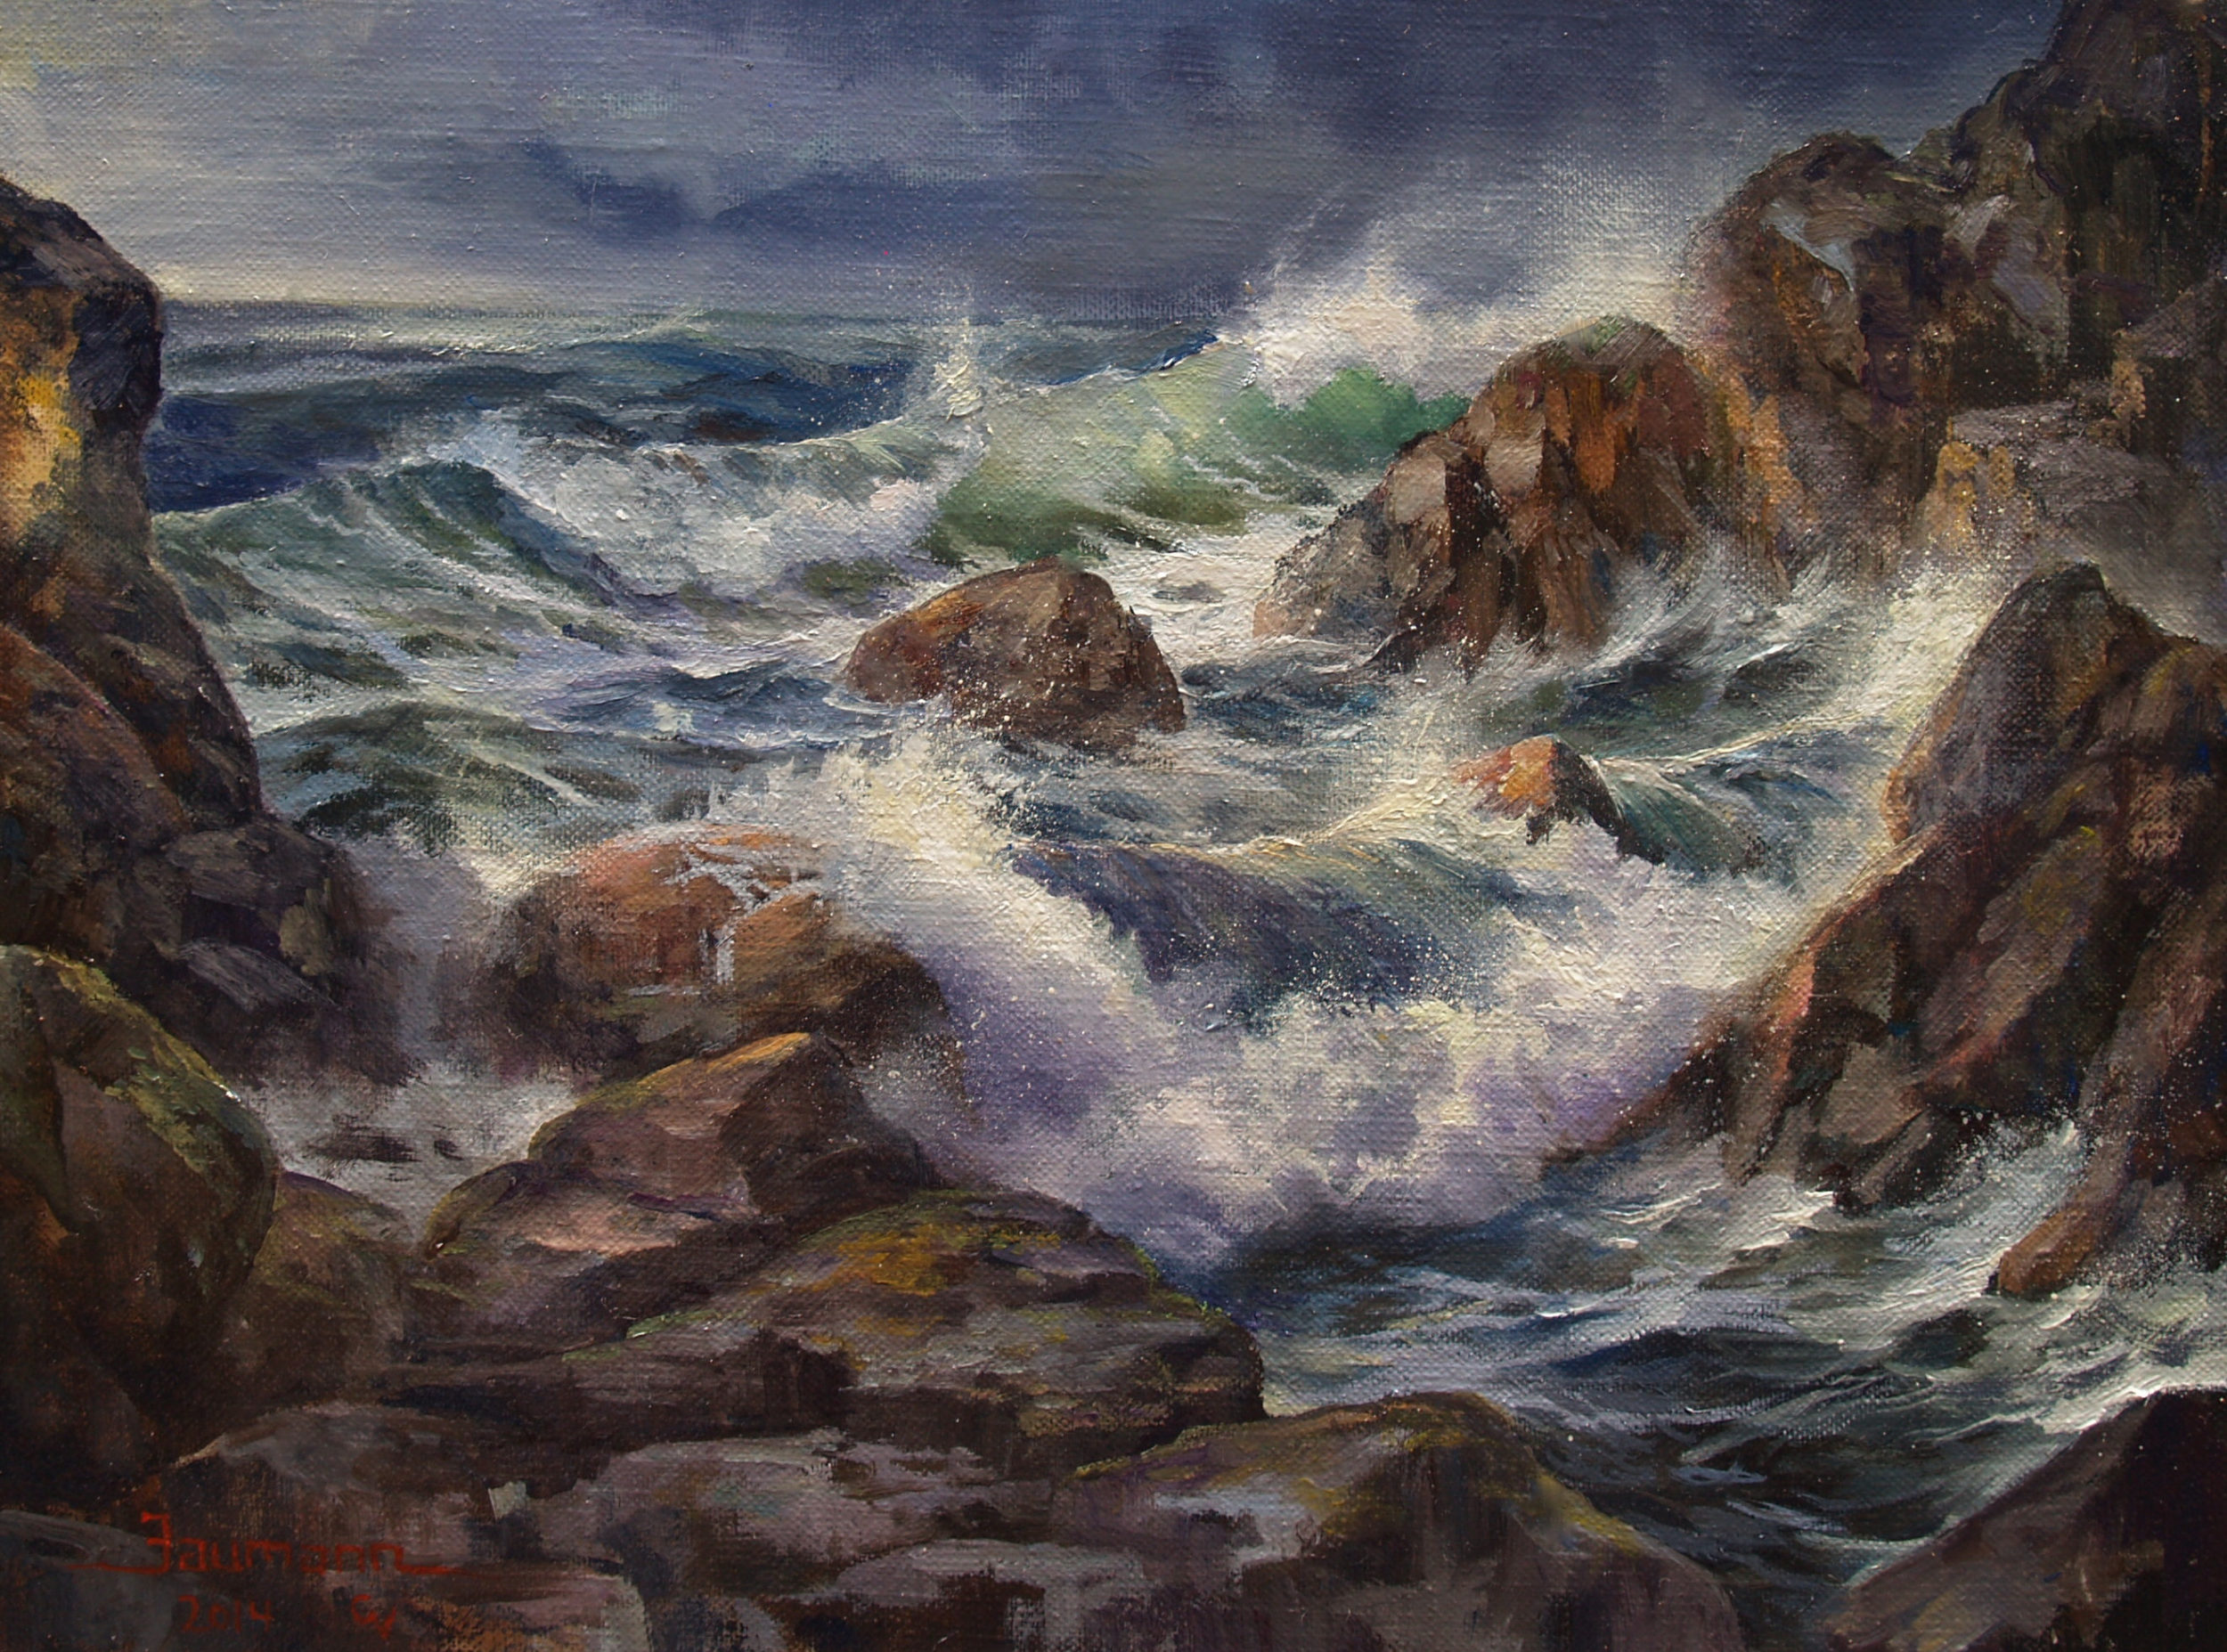 Point Reyes Painting, Coastal Thunder is a seascape of Point Reyes painted by Stefan Baumann, 12 x 16 Original Oil on Oil Primed Linen Canvas.